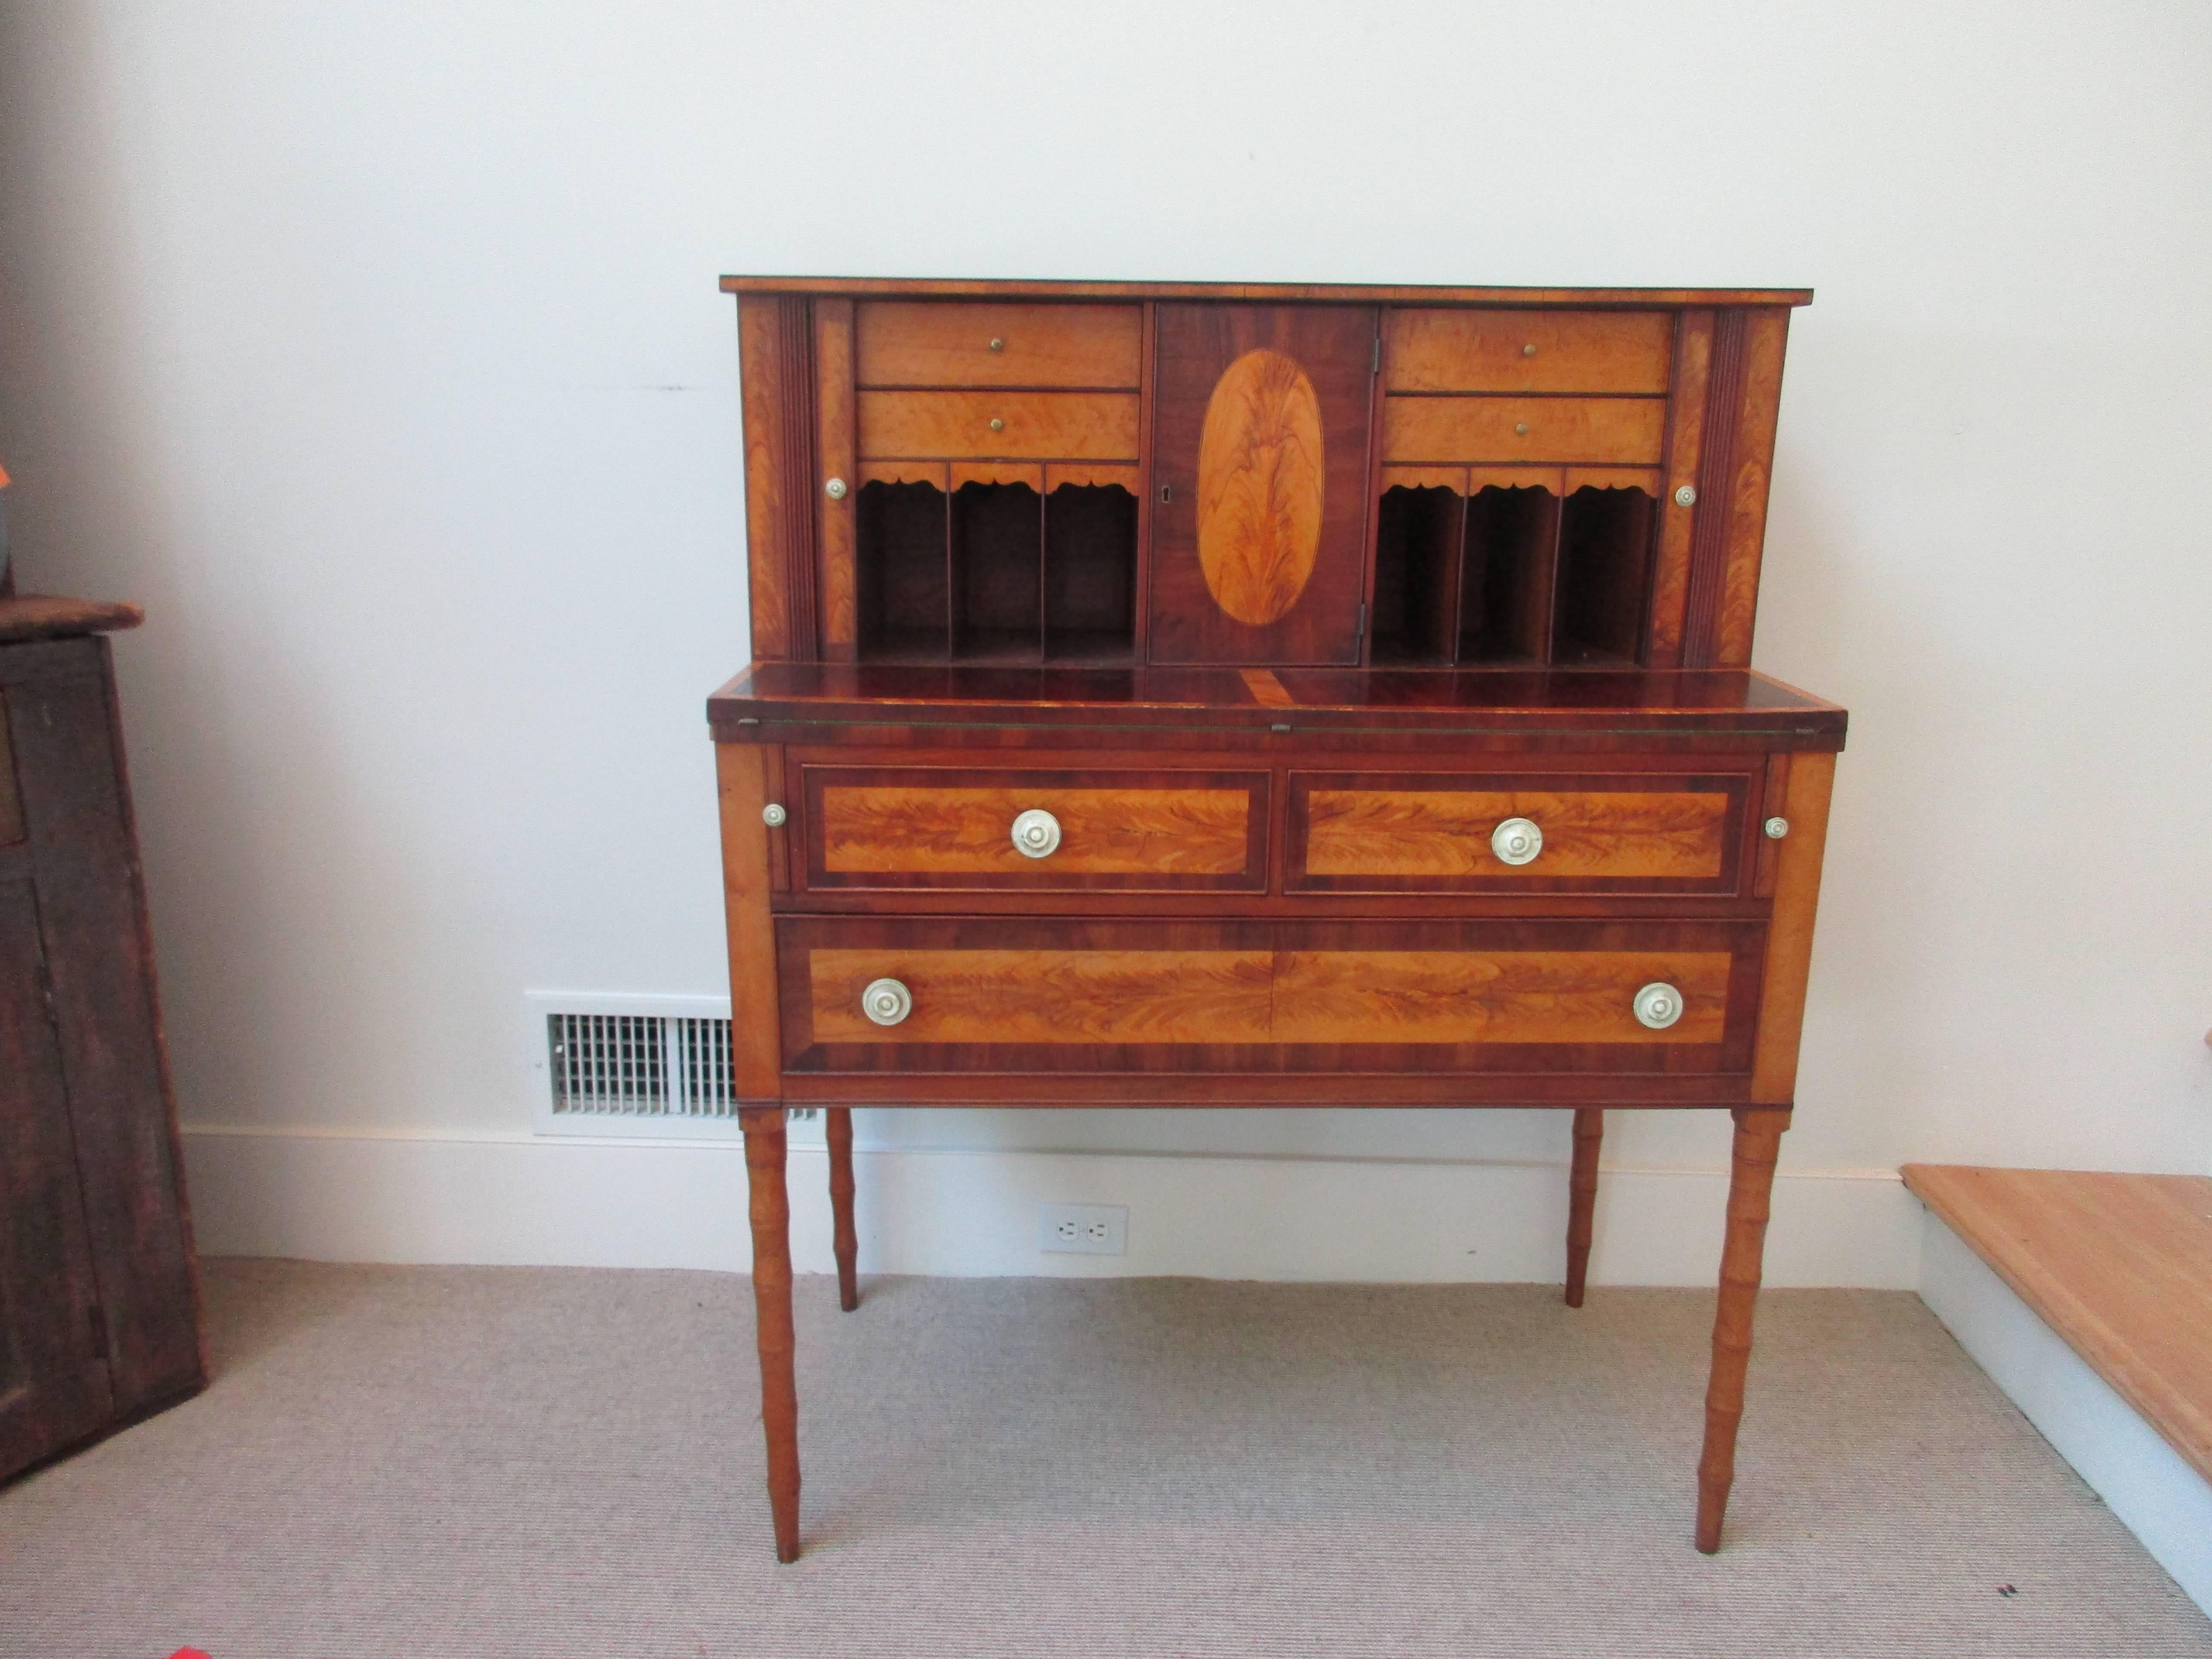 Federal Mahogany and Birch inlaid secretary/desk with contrasting veneers and
bone pulls.